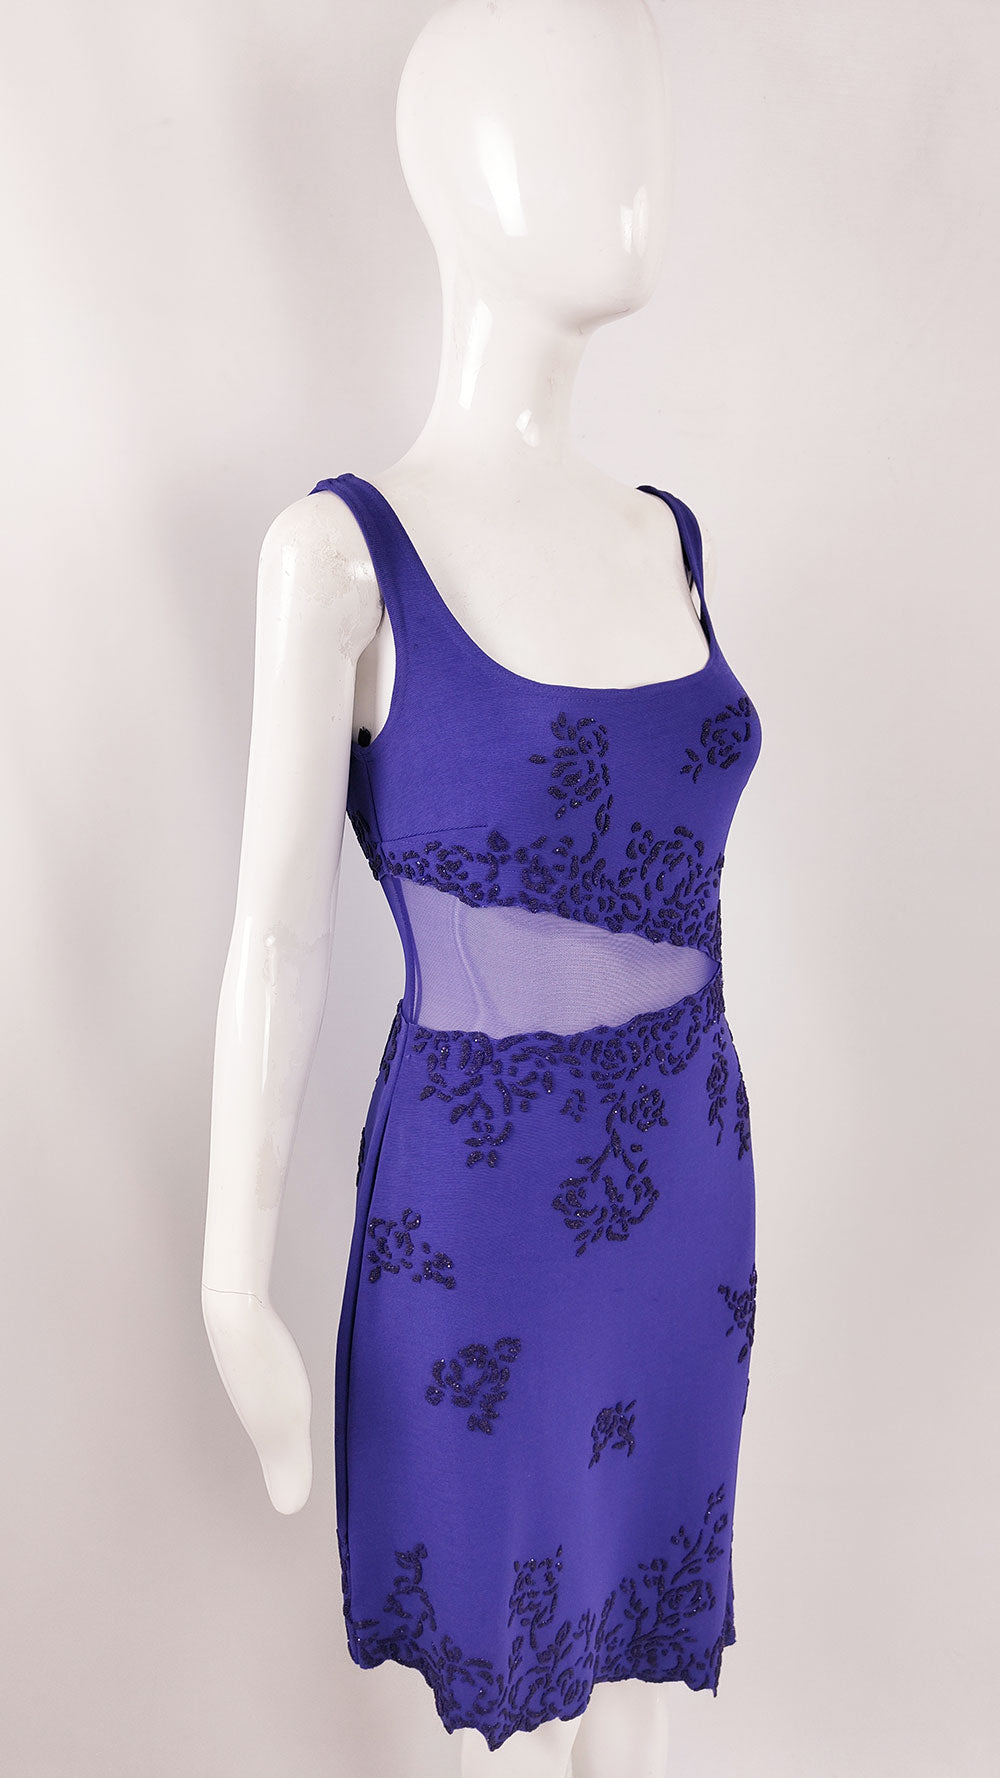 An image of a glamorous vintage beaded evening dress by Tadashi Shoji with a sheer mesh cut out at the front.